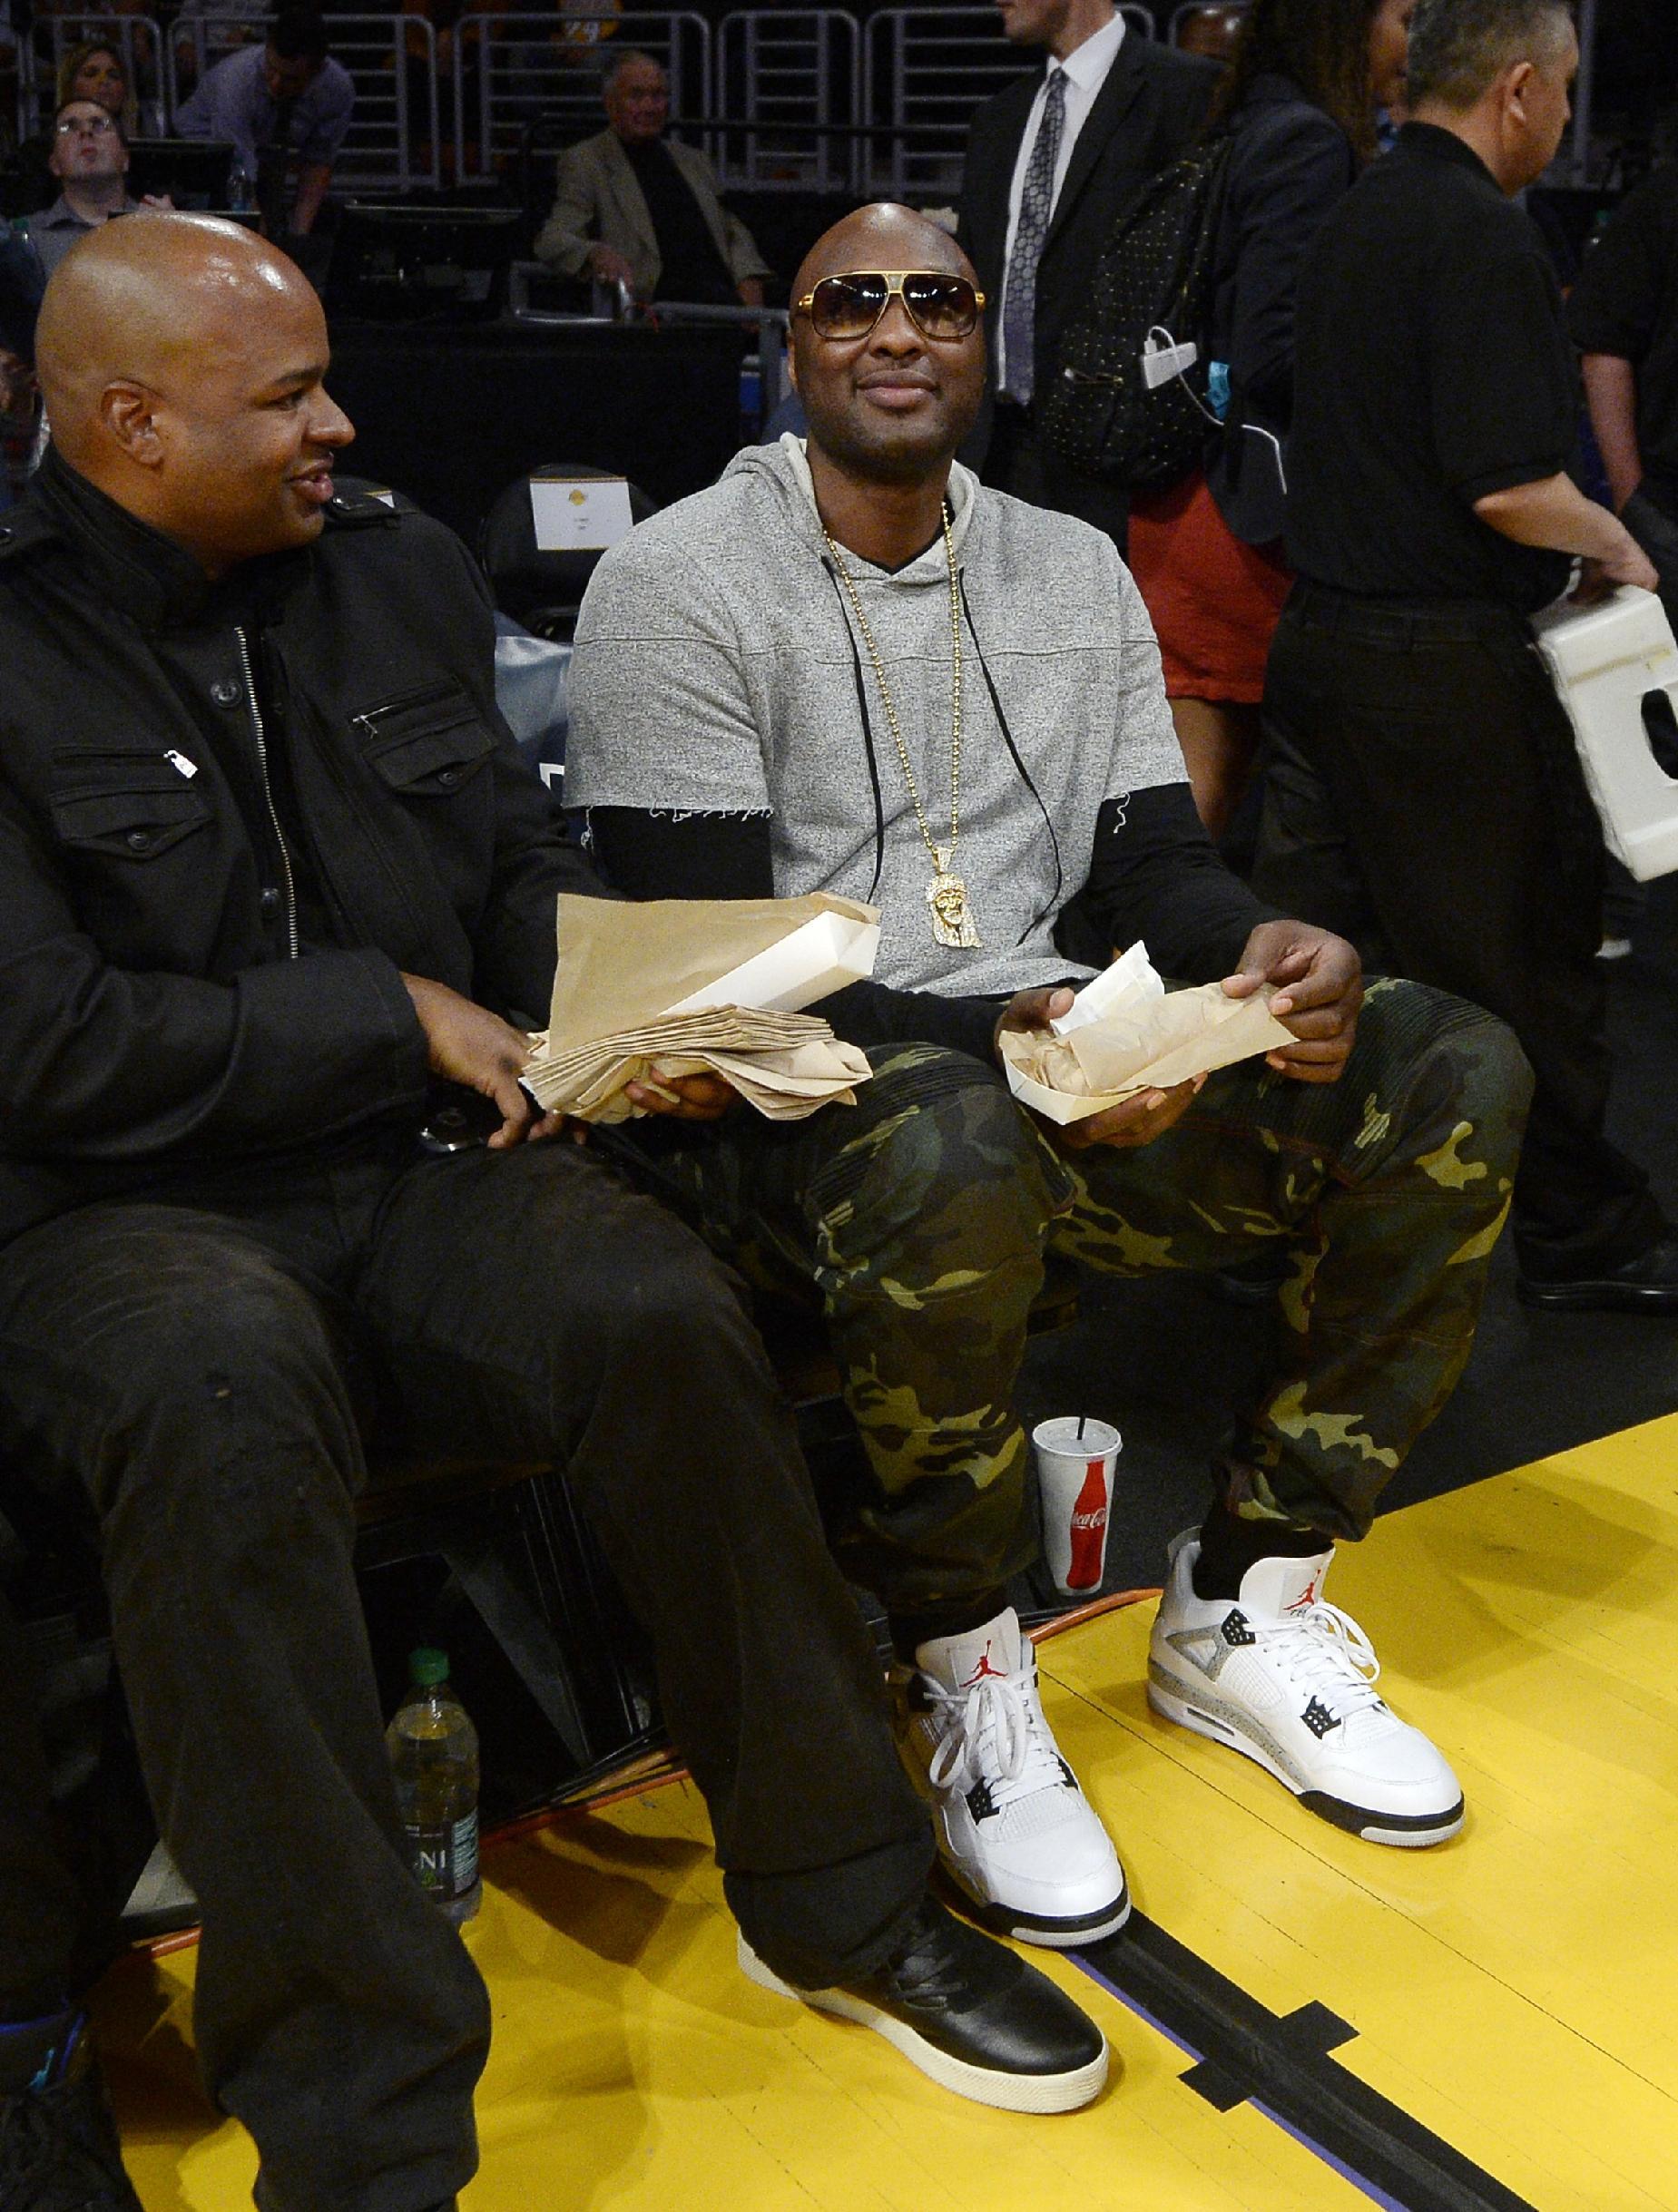 Lamar Odom attends a Miami Heat-L.A. Lakers game on March 30, 2016. (Kevork Djansezian/Getty Images)